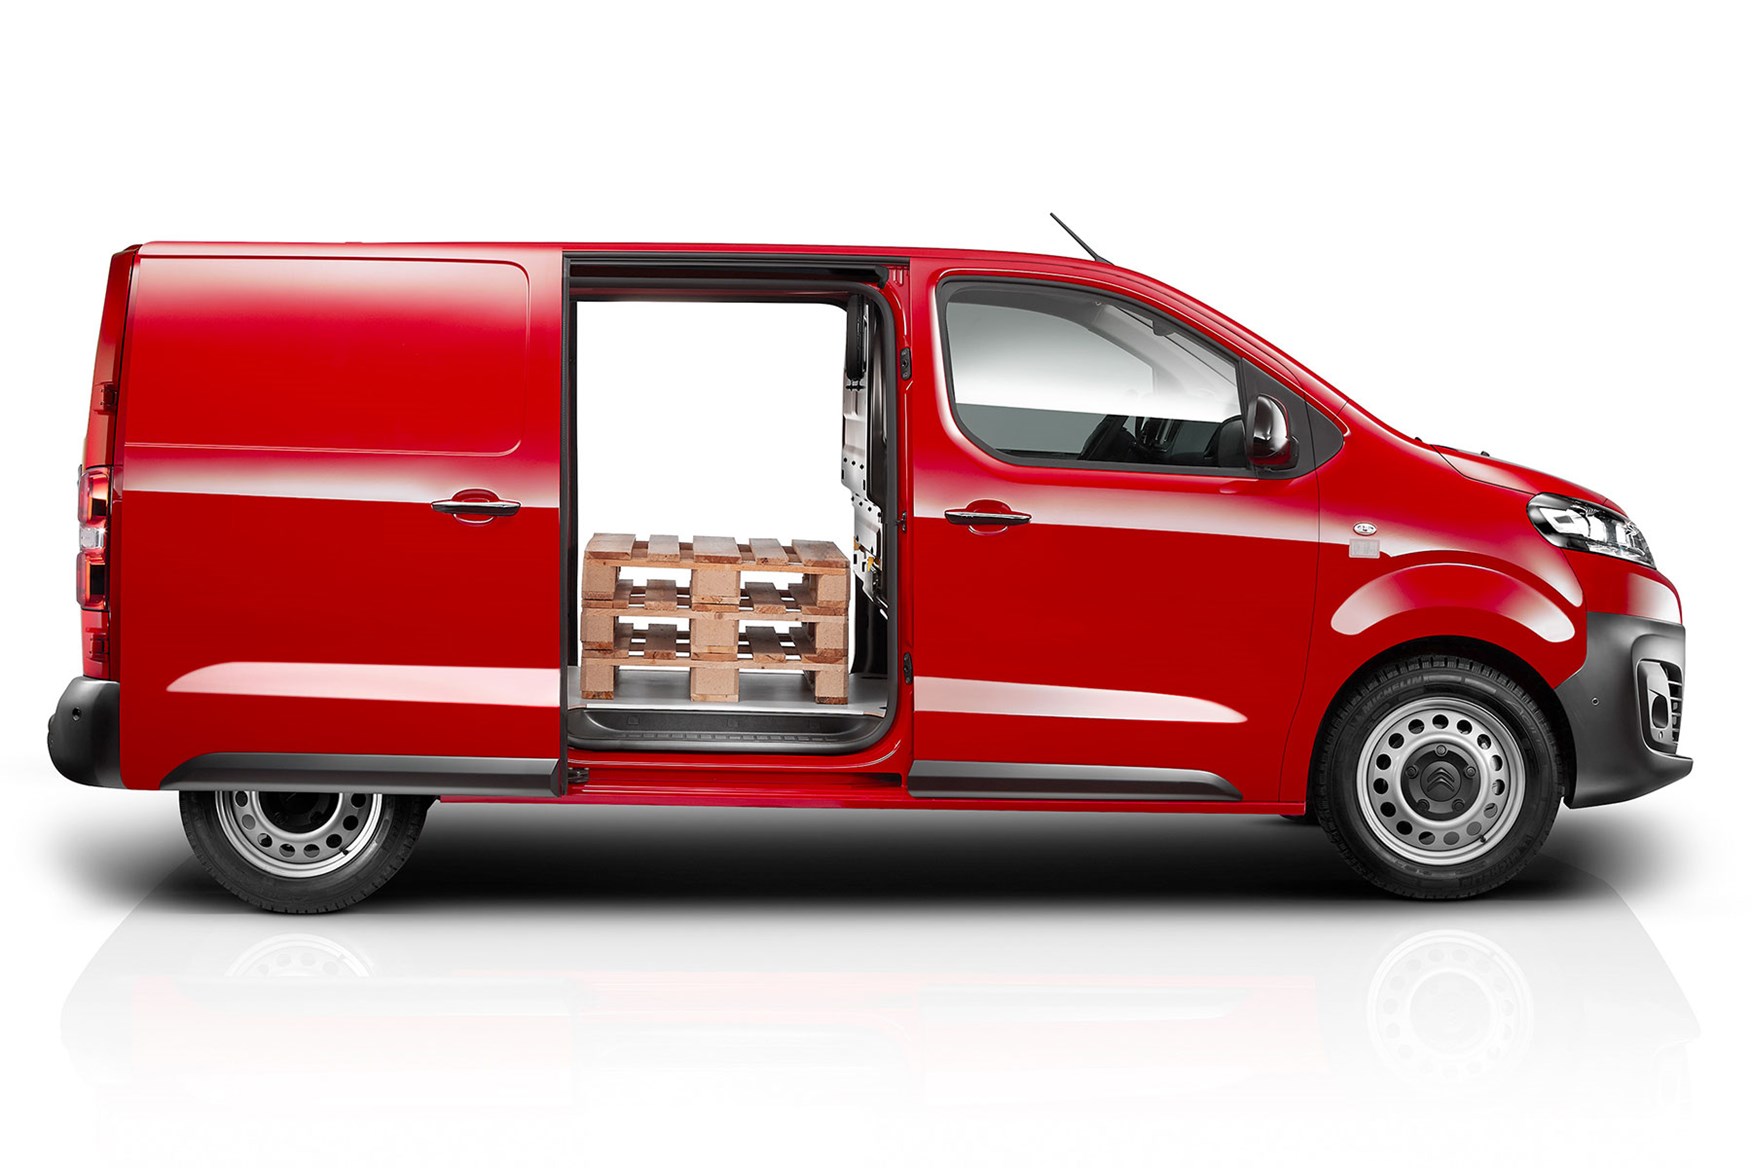 Citroen Dispatch van dimensions (2016-on), capacity, payload, volume, towing